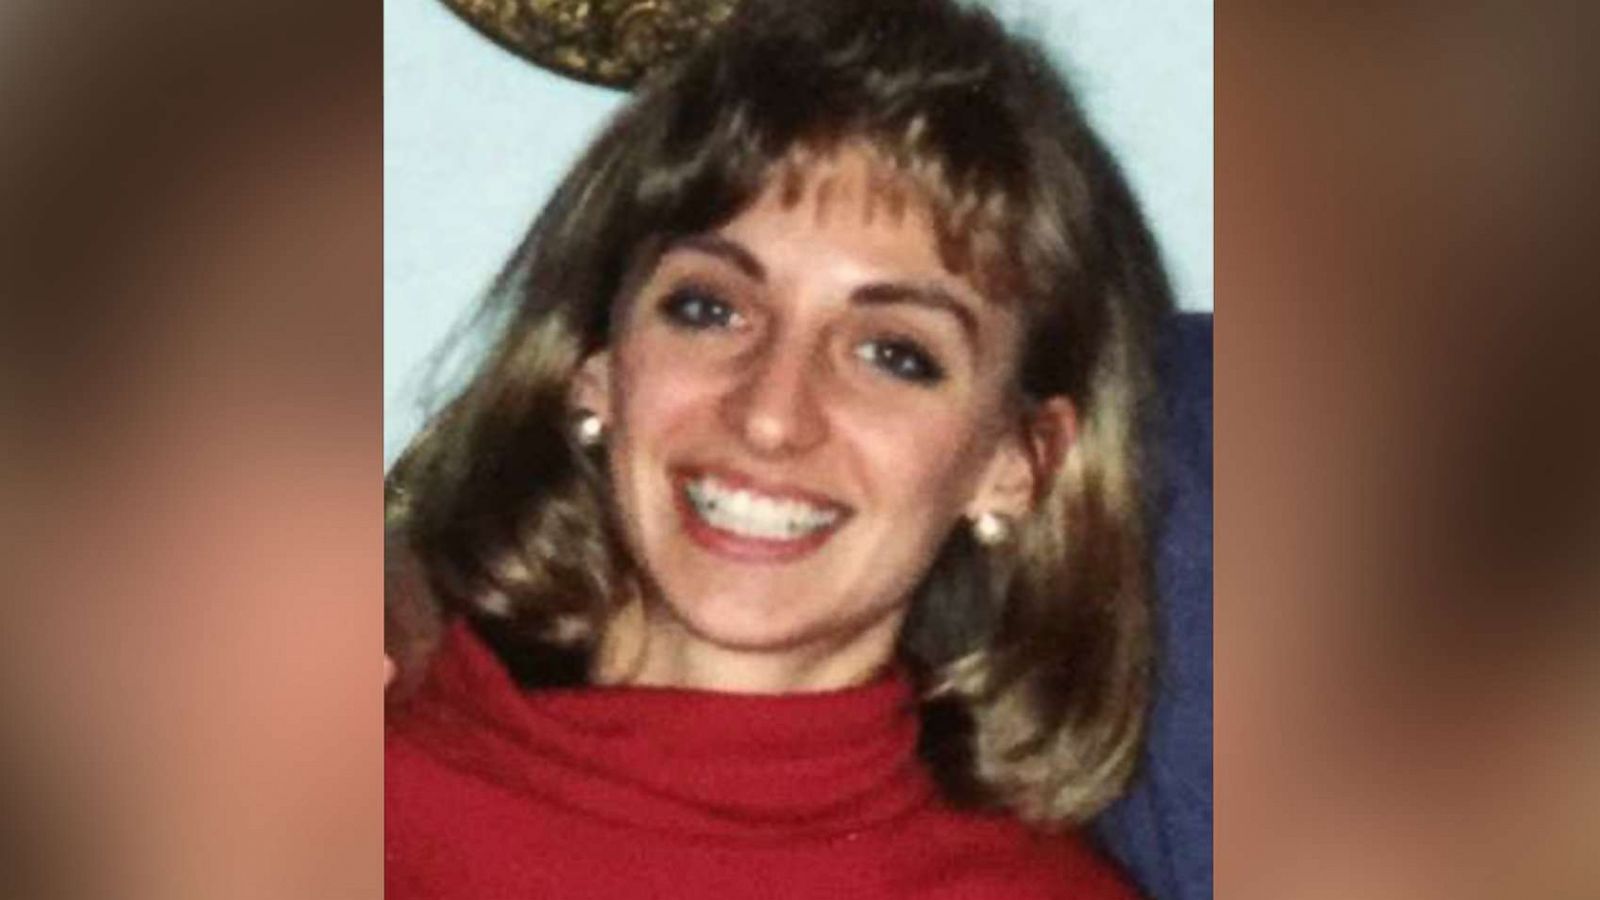 Genetic Genealogy Cracked, Christy Mirack's Cold Case After Over 25 Years